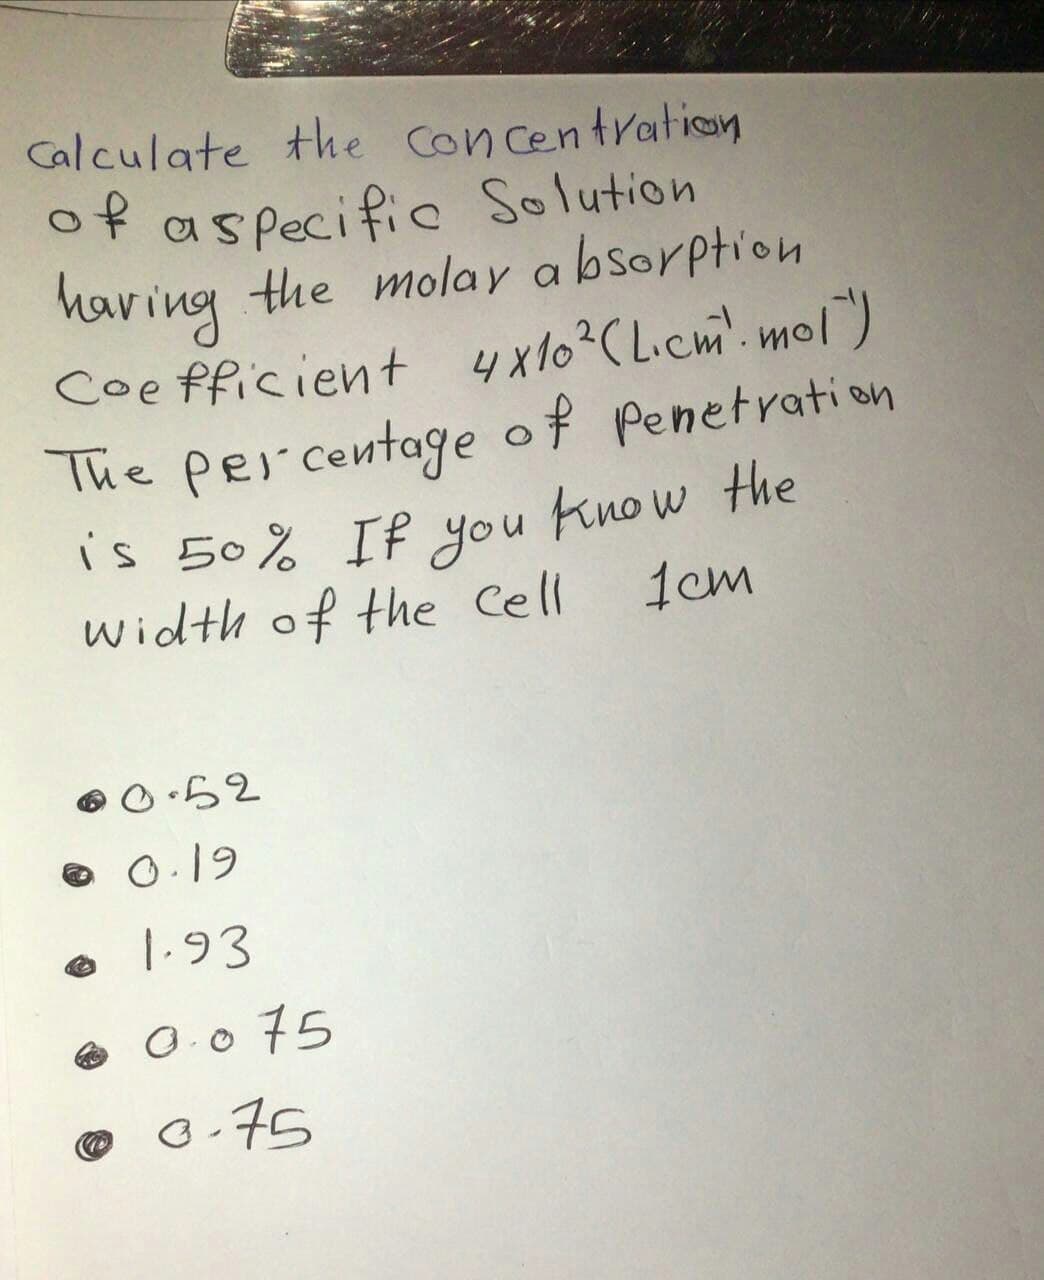 Calculate the Con centration
of aspecific Solution
having
Coe fficient 4x10?C Licm. mol)
The percentage of
is 50% If you know the
width of the Cell
the molay a bsorption
Penetrati on
1cm
O.19
1.93
e O.0 75
O 0-75
